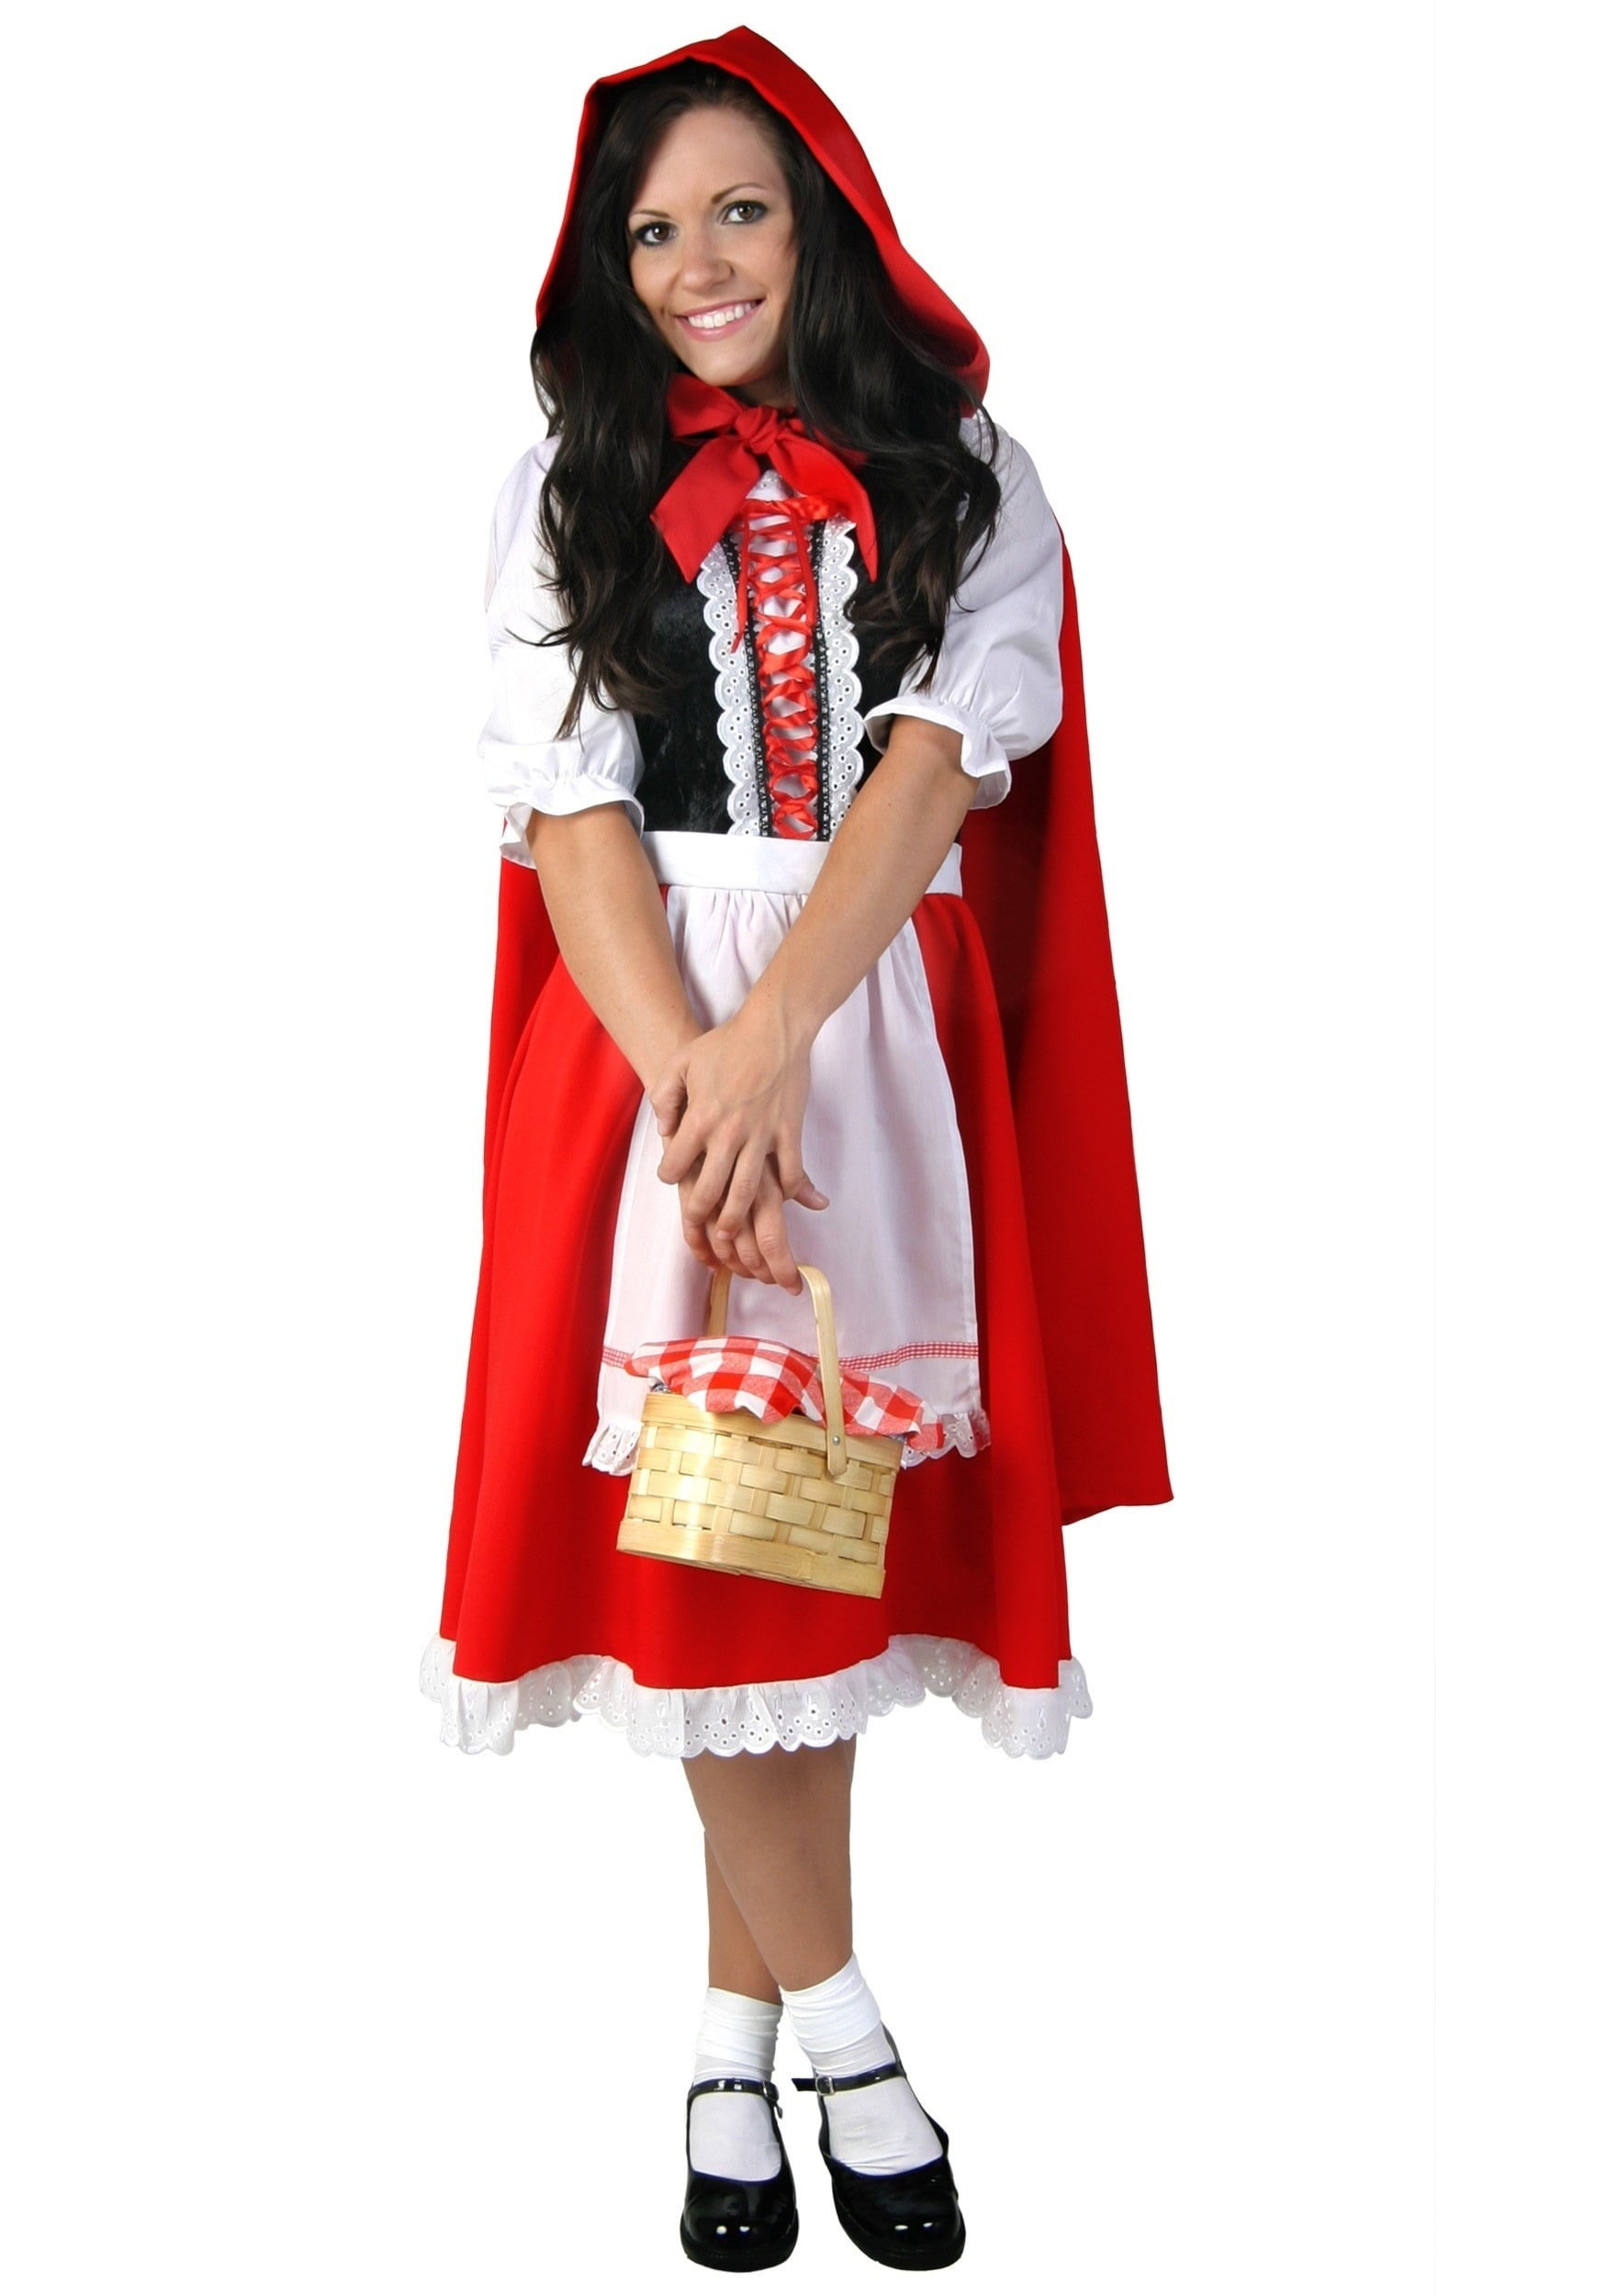 Halloween Evil Red Riding Hood BIG BAD WOLF Fancy Dress Costume ALL SIZES 